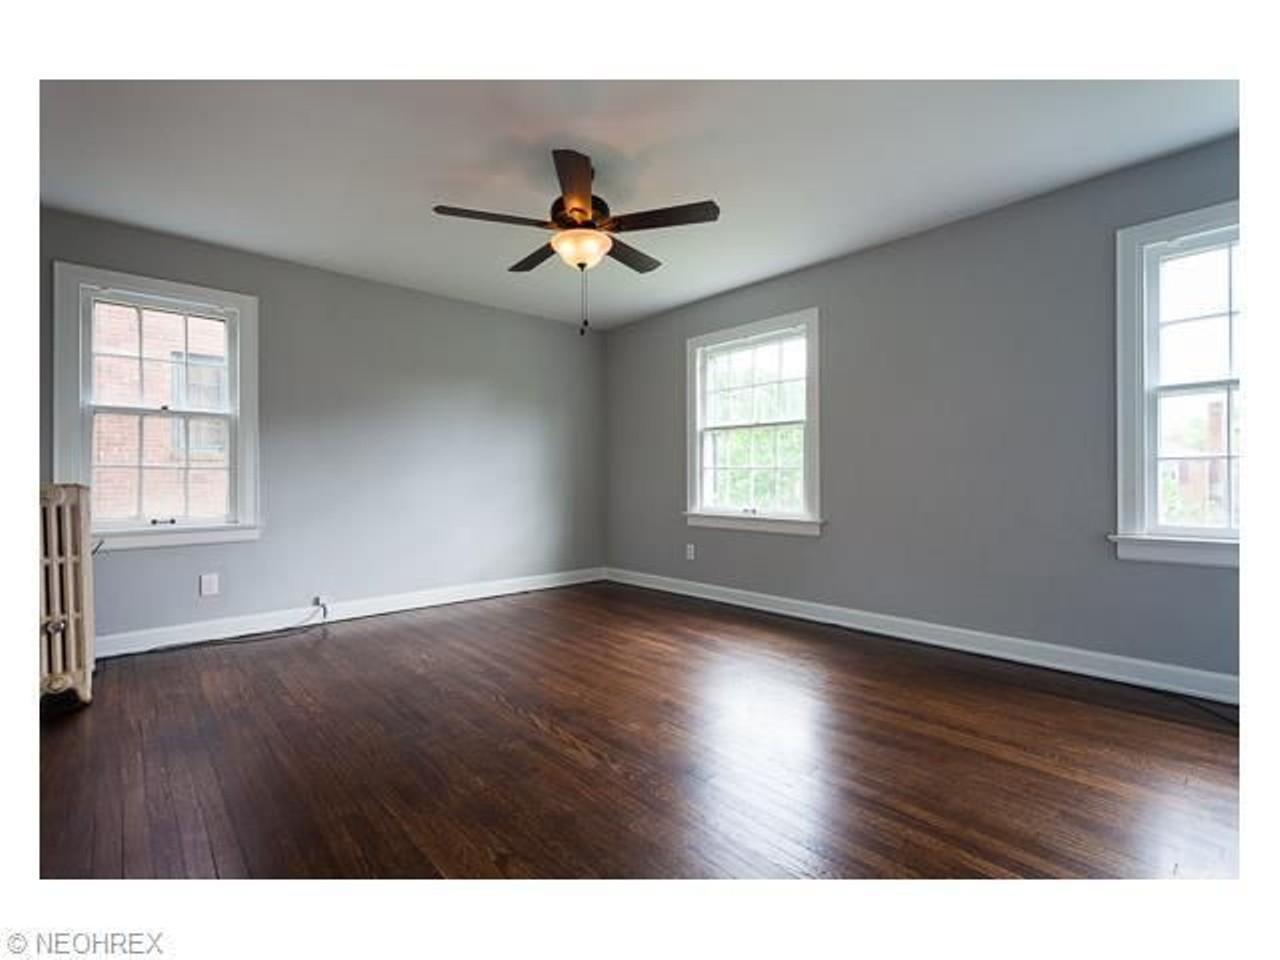 52 Photos of Super Affordable Homes For Sale Right Now in Shaker